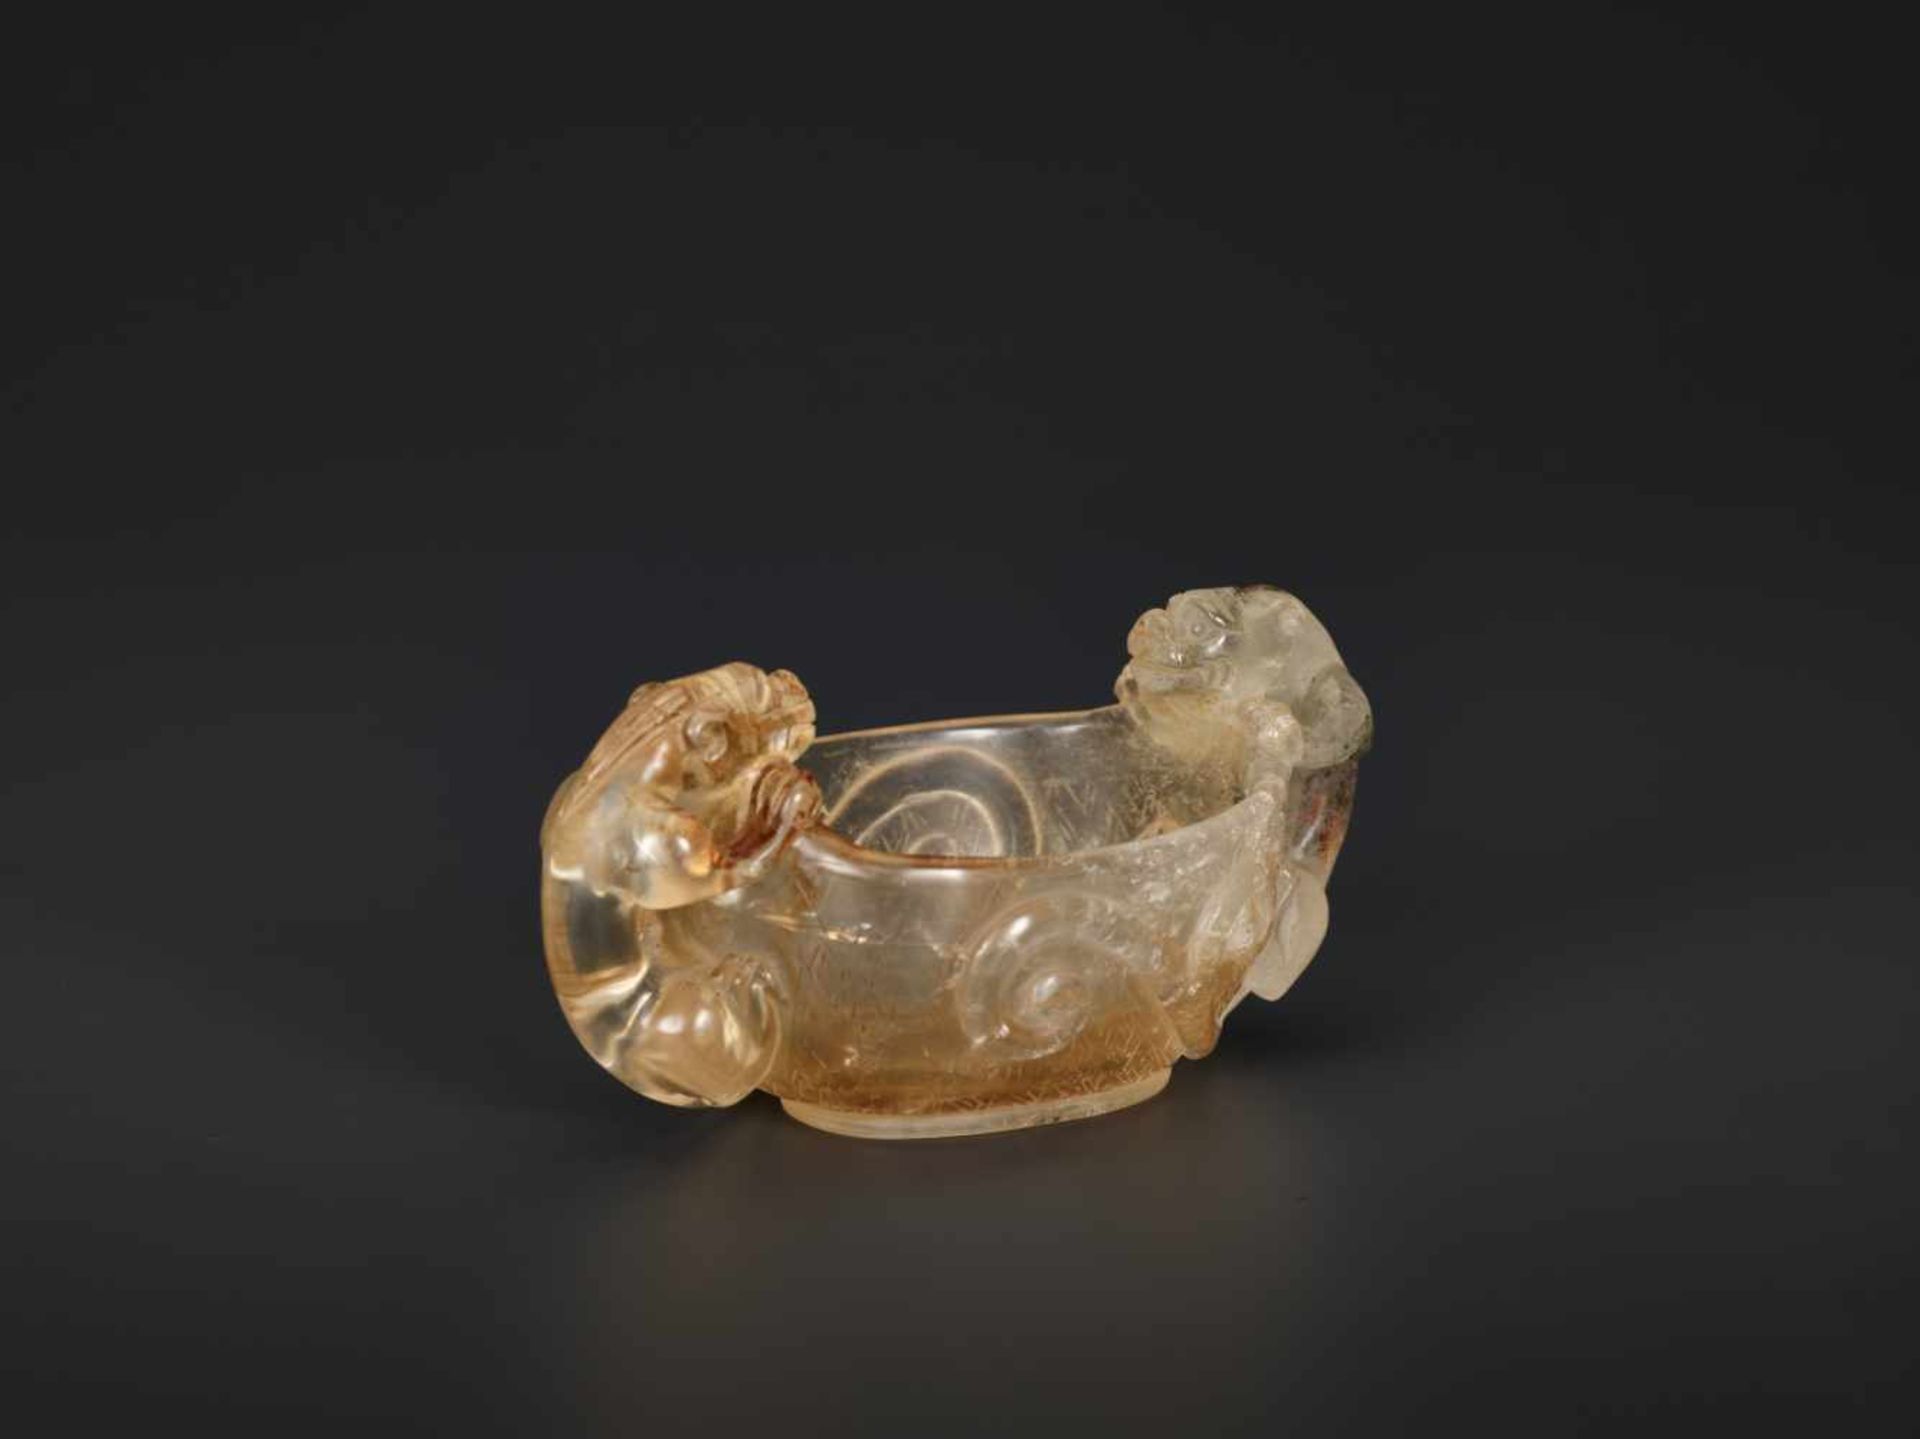 A SMALL ROCK CRYSTAL ‘CHILONG’ BRUSH WASHER IN LIBATION CUP SHAPE, 18TH CENTURY Transparent rock - Image 6 of 8